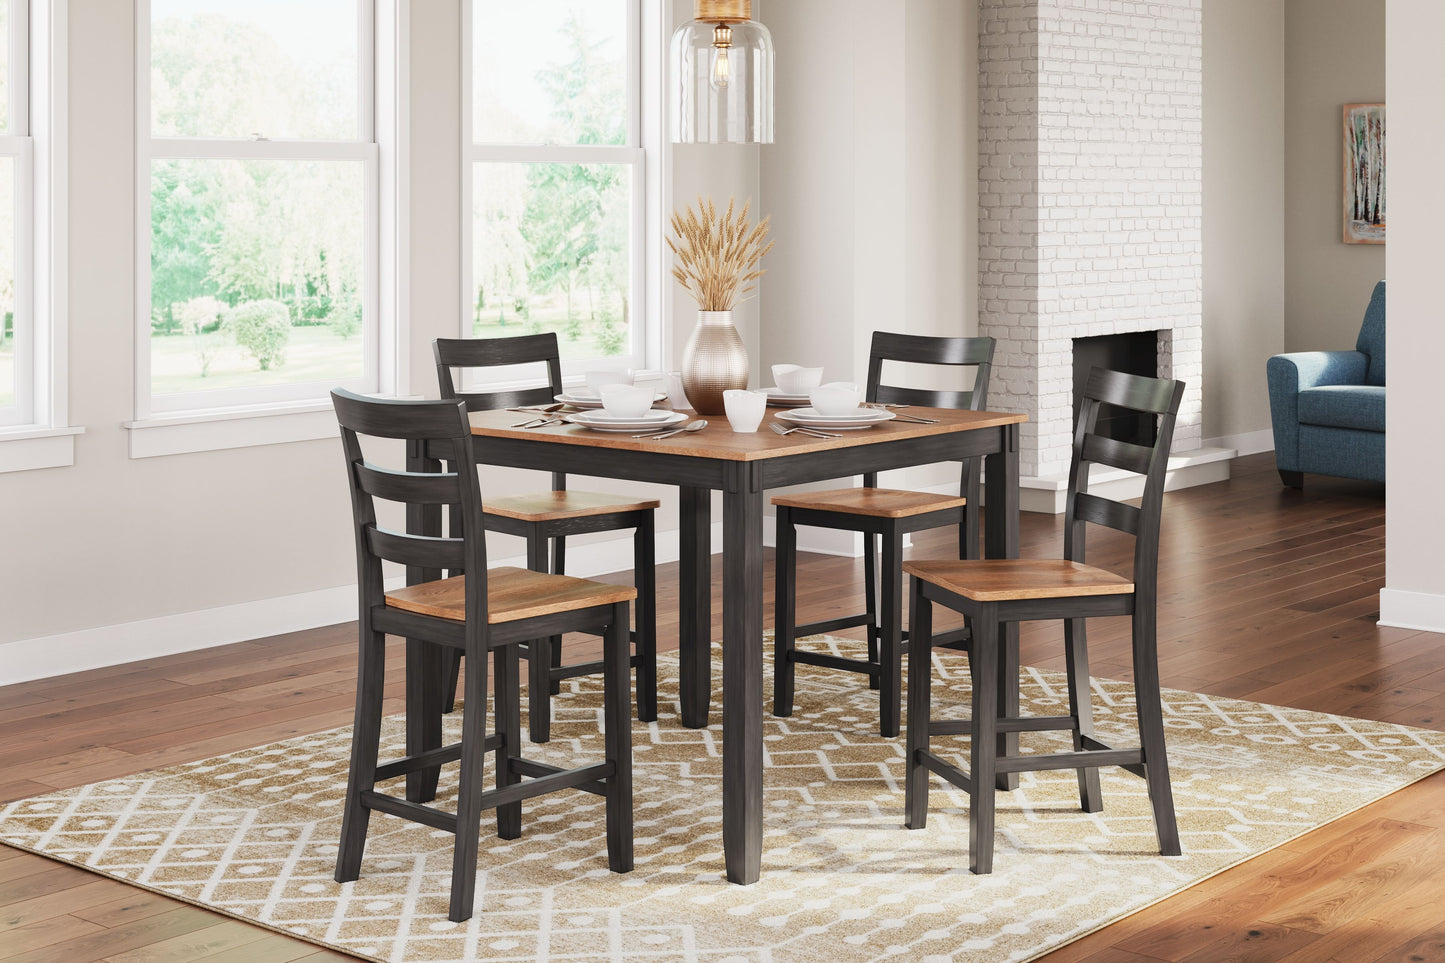 Gesthaven - Natural / Brown - Drm Counter Table Set (Set of 5)